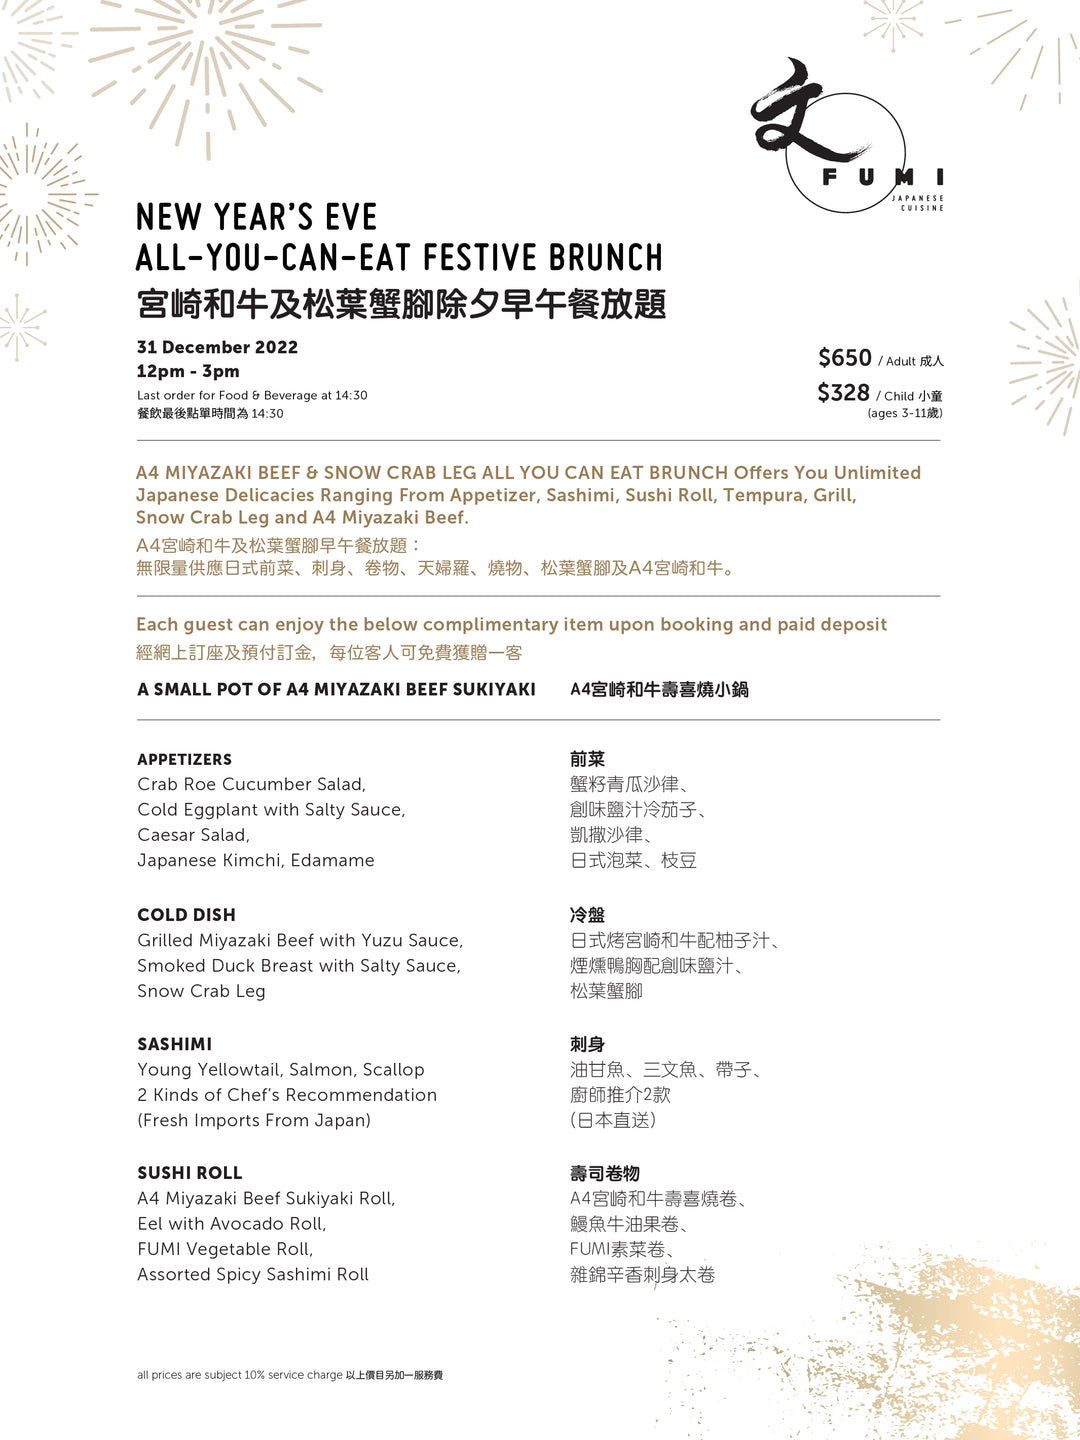 FUMI New Year's Eve Brunch (December 31)